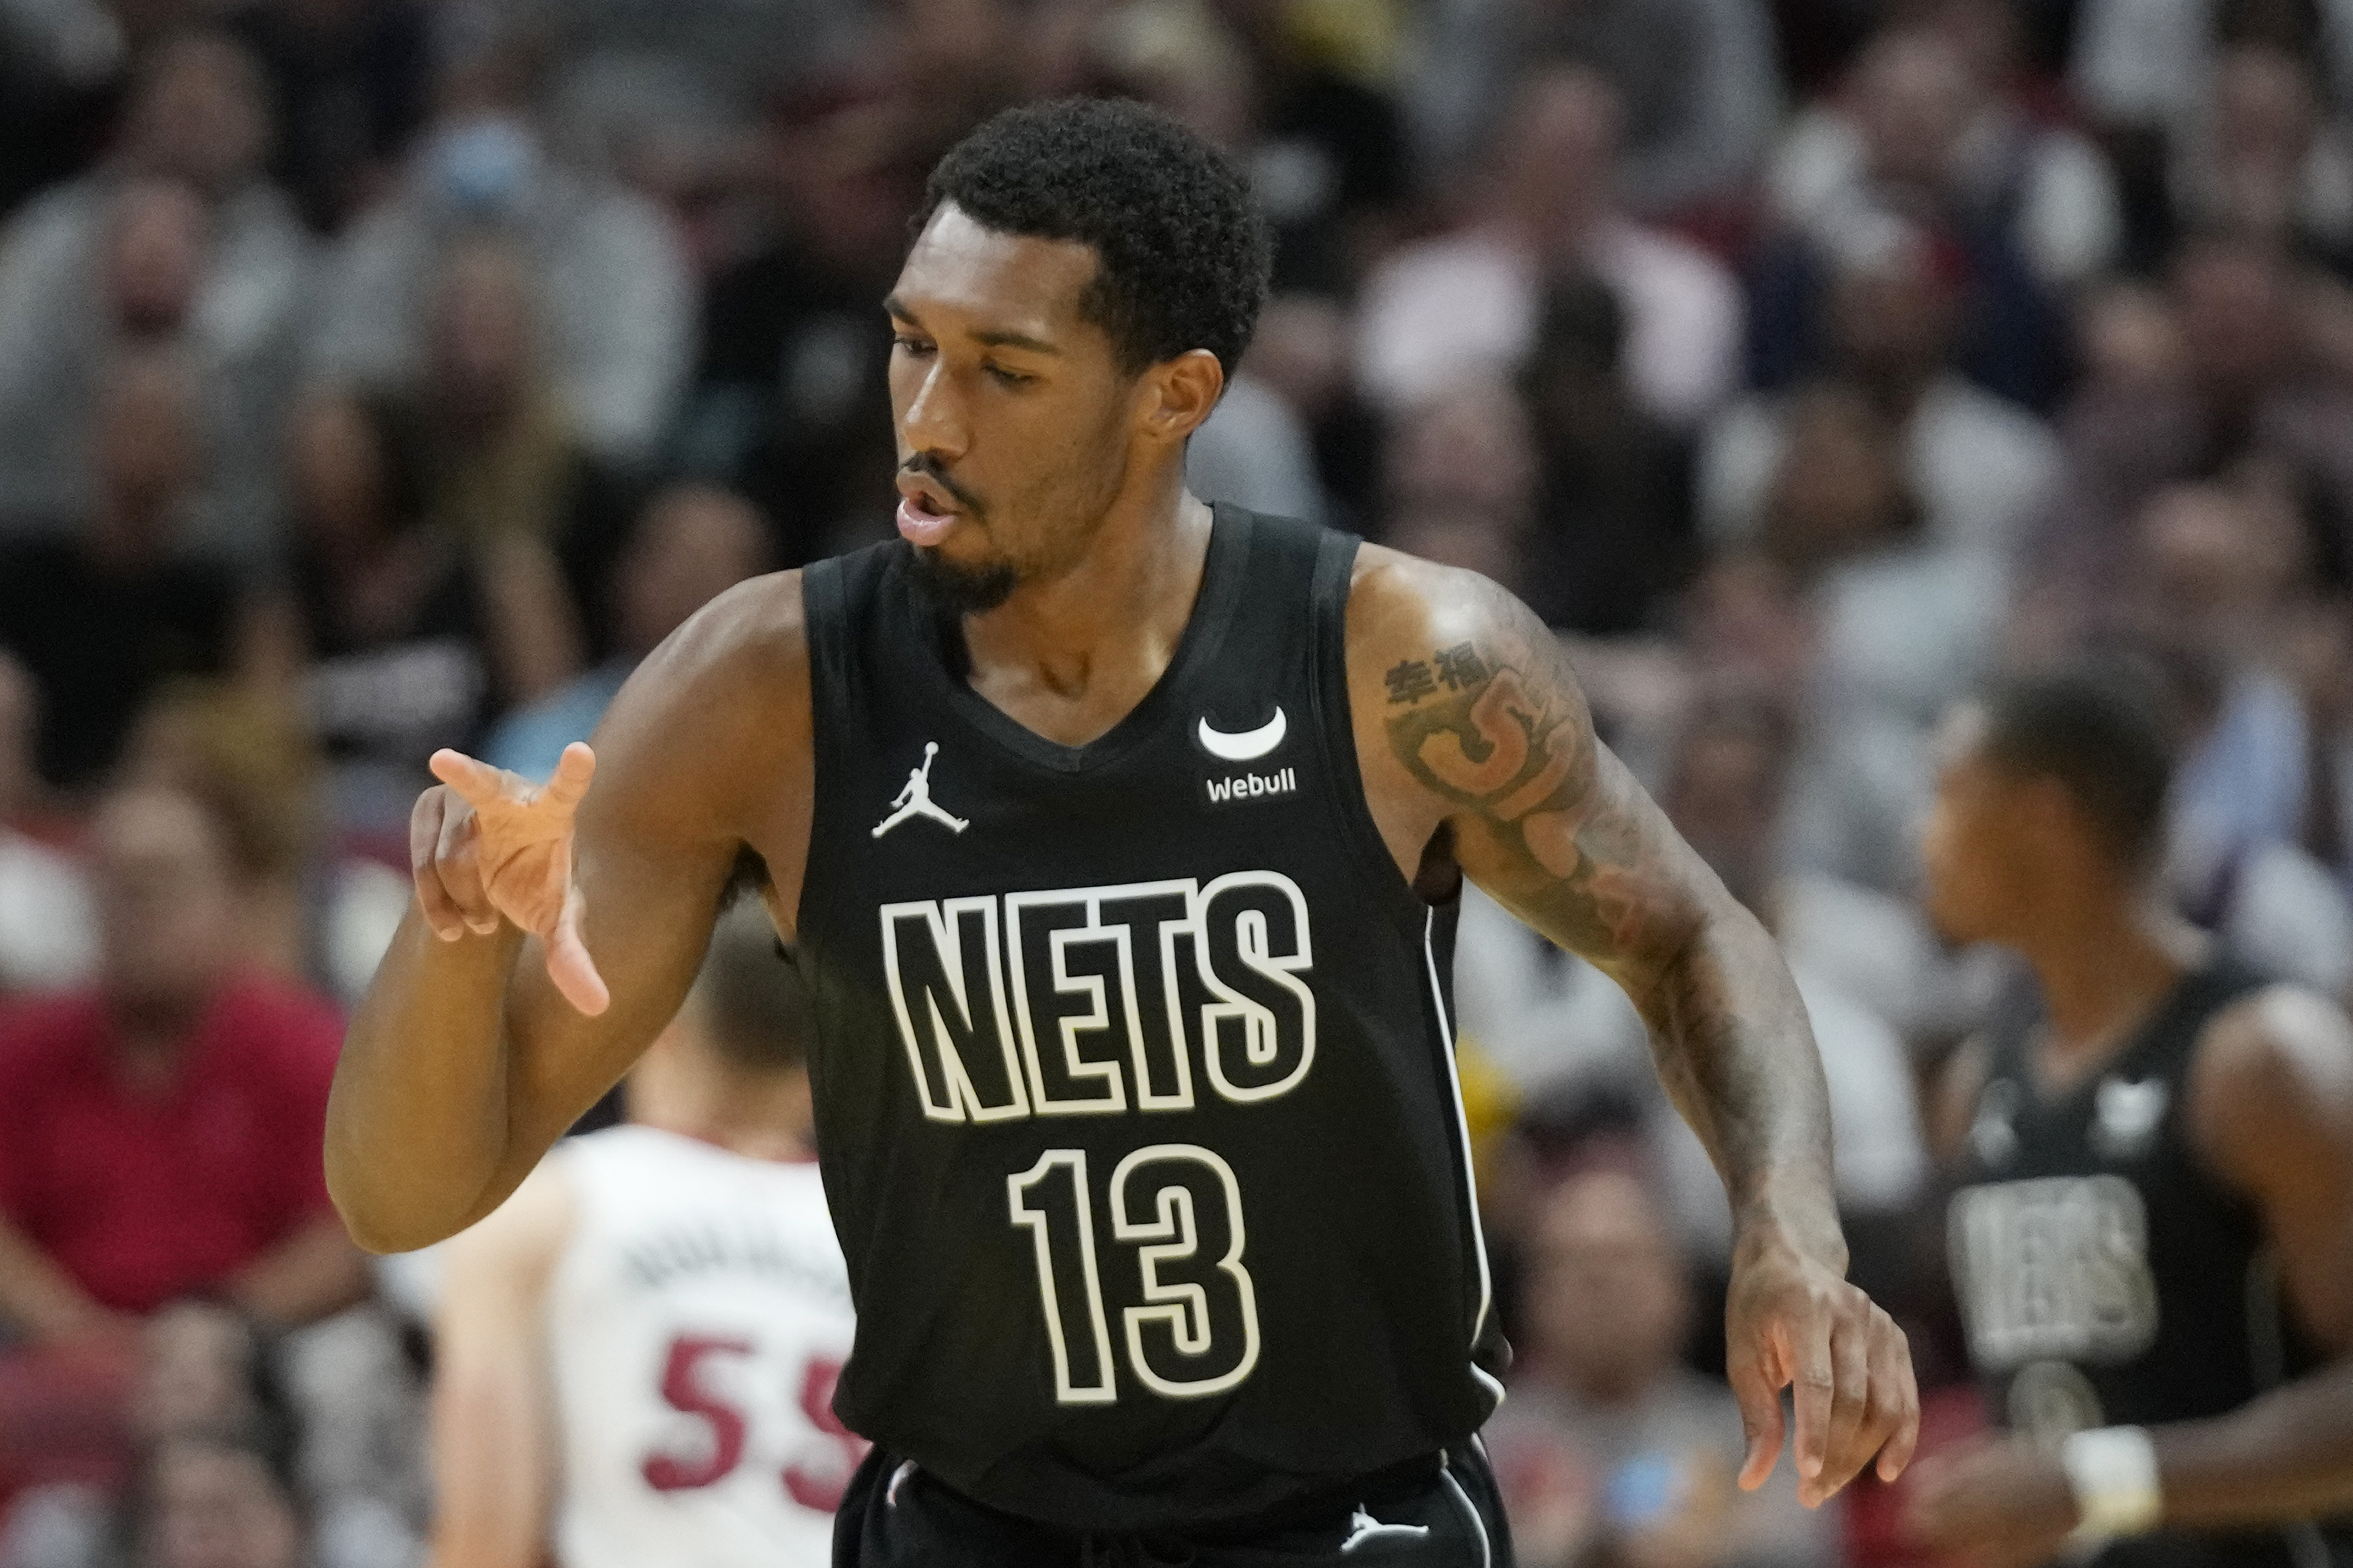 Sunday night basketball: Nets wrap up brief road trip in Miami vs